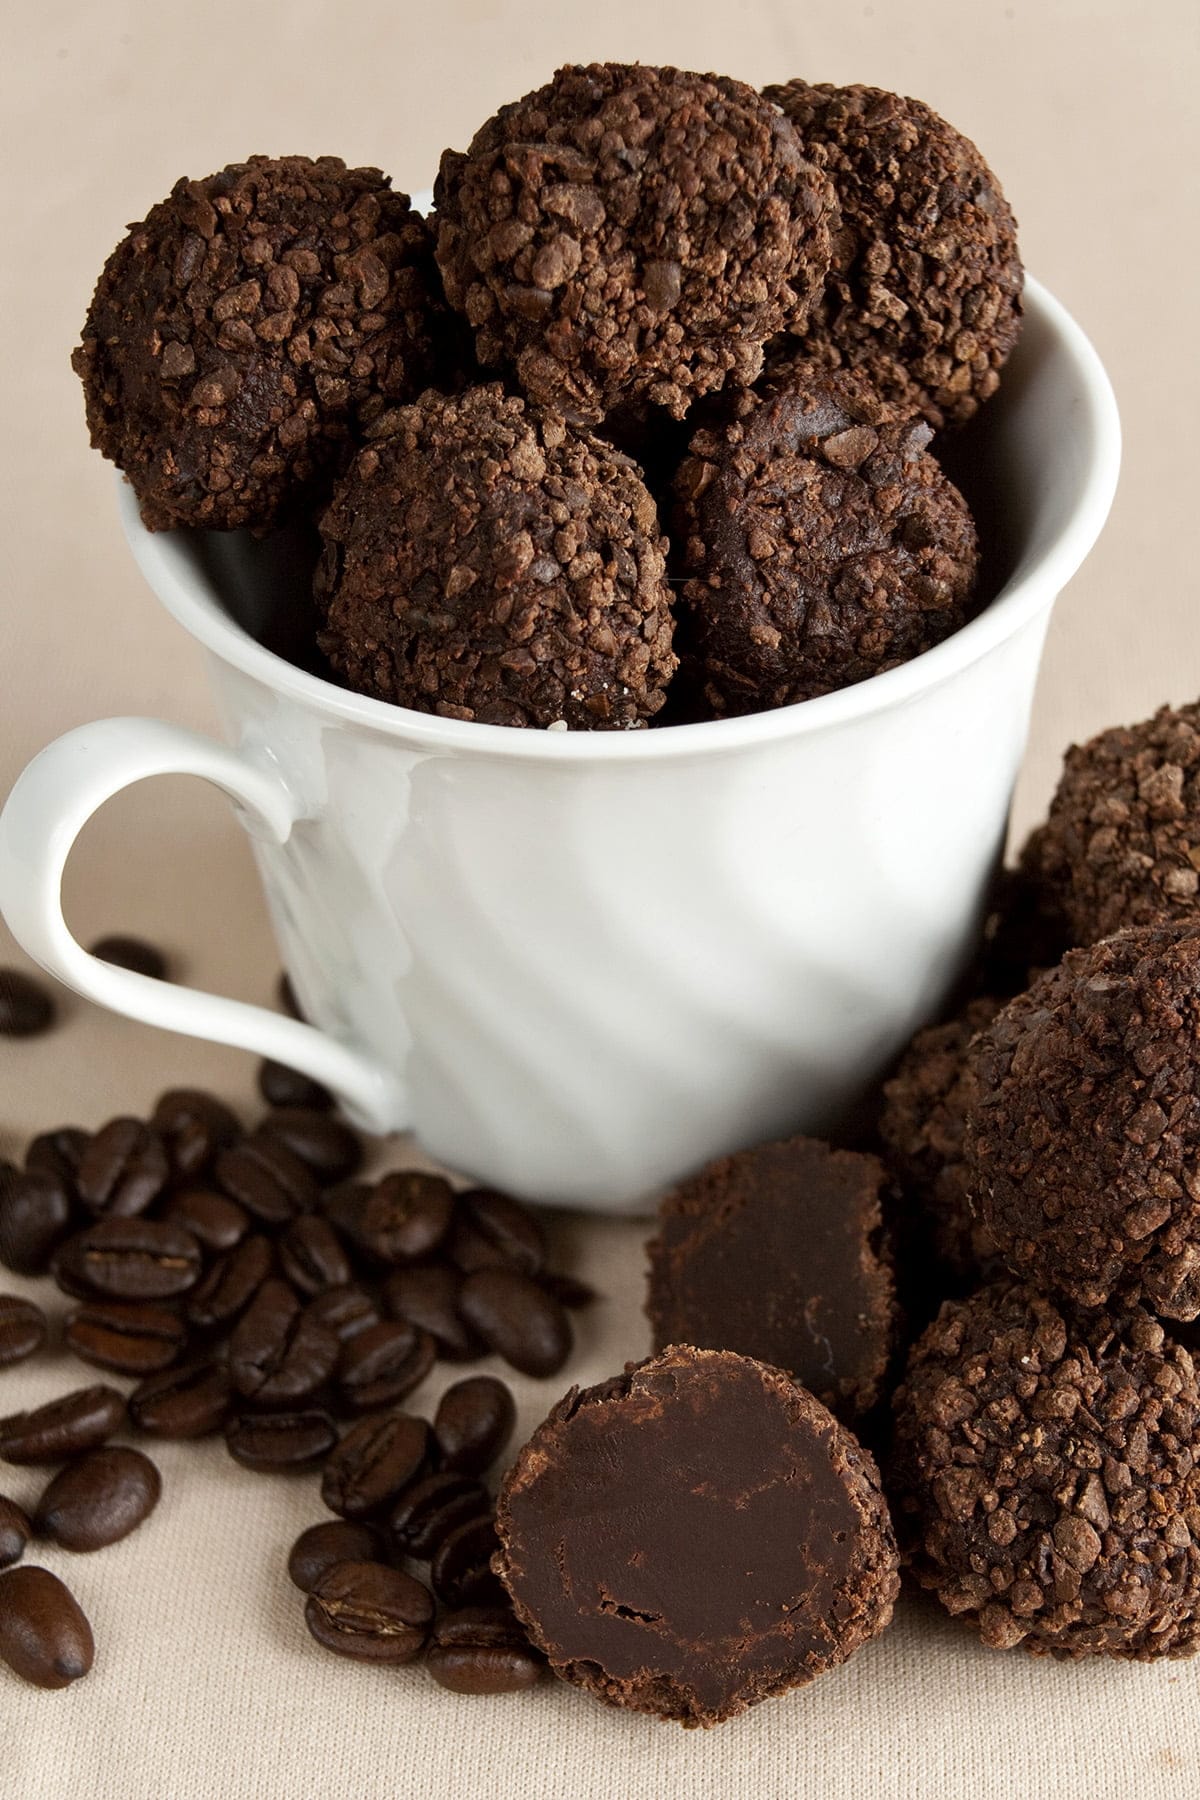 Dark chocolate truffles - coated in smashed coffee beans - fill a white coffee mug. There are stray truffles and coffee beans at the base of the mug.